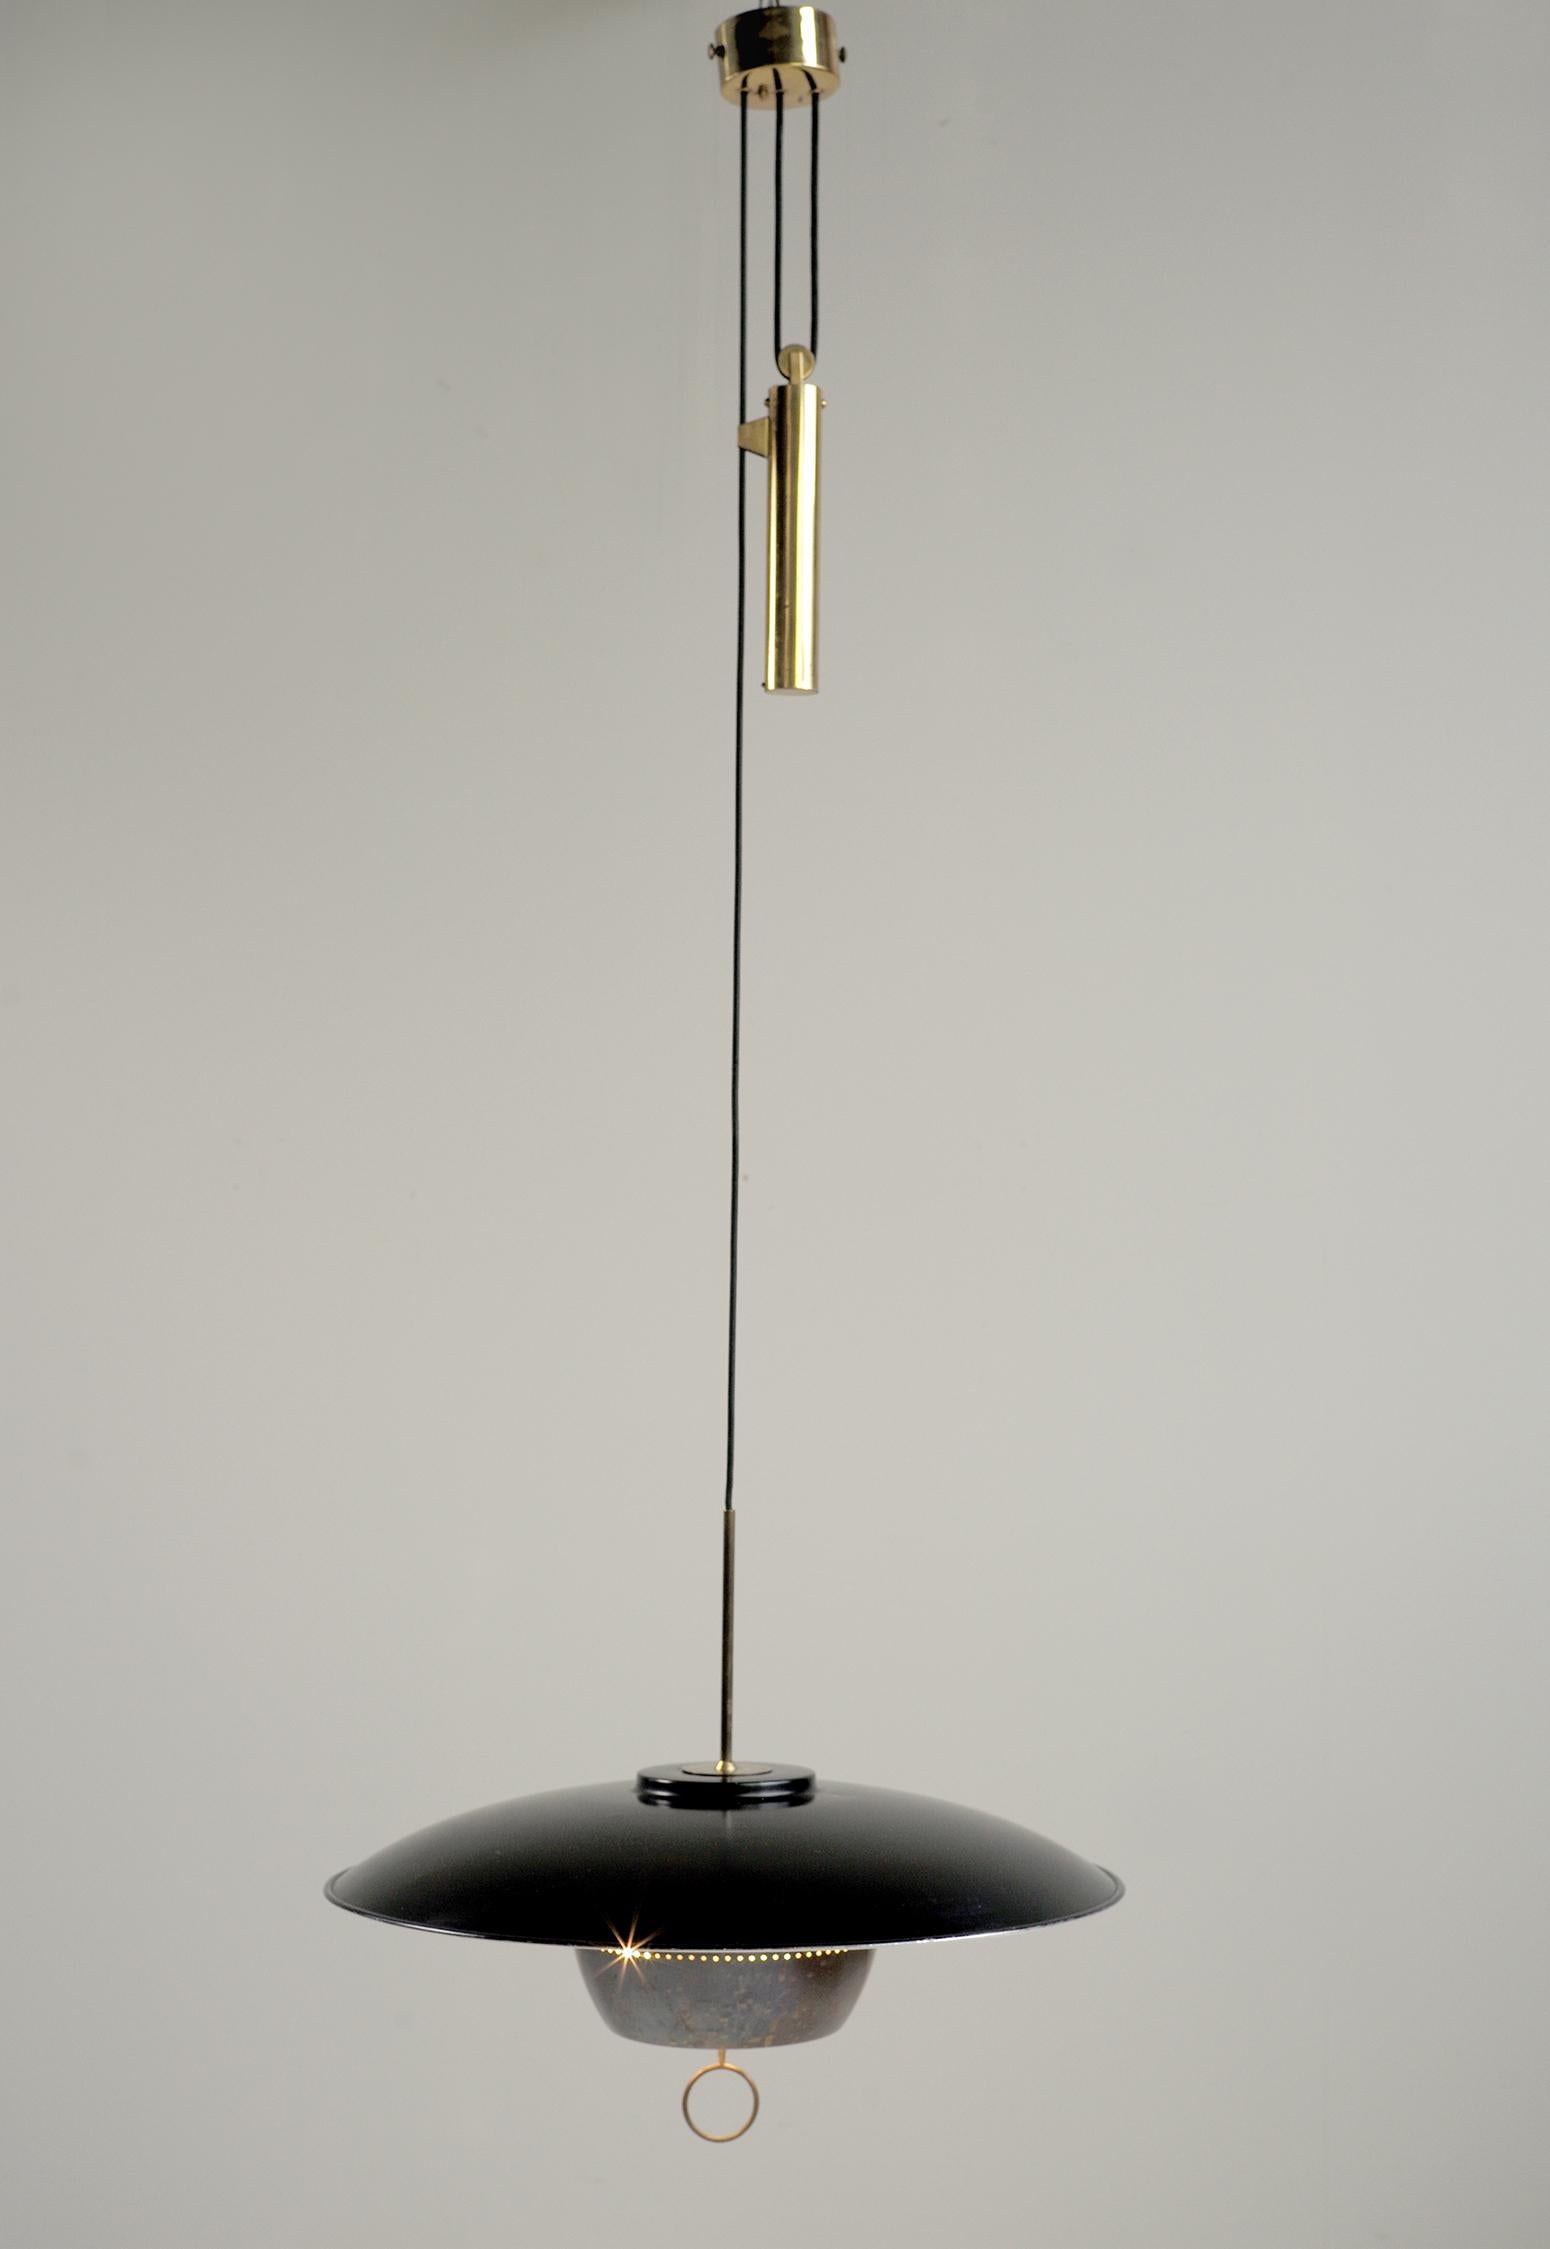 Rare counterweight suspension model A 5011 by Gaetano Scolari for Stilnovo, Italy 1950.
Golden brass or varnish, large reflector in black and matte white lacquered metal, black fabric thread.
Signed Stilnovo on the reflector.
Measures: Maximum